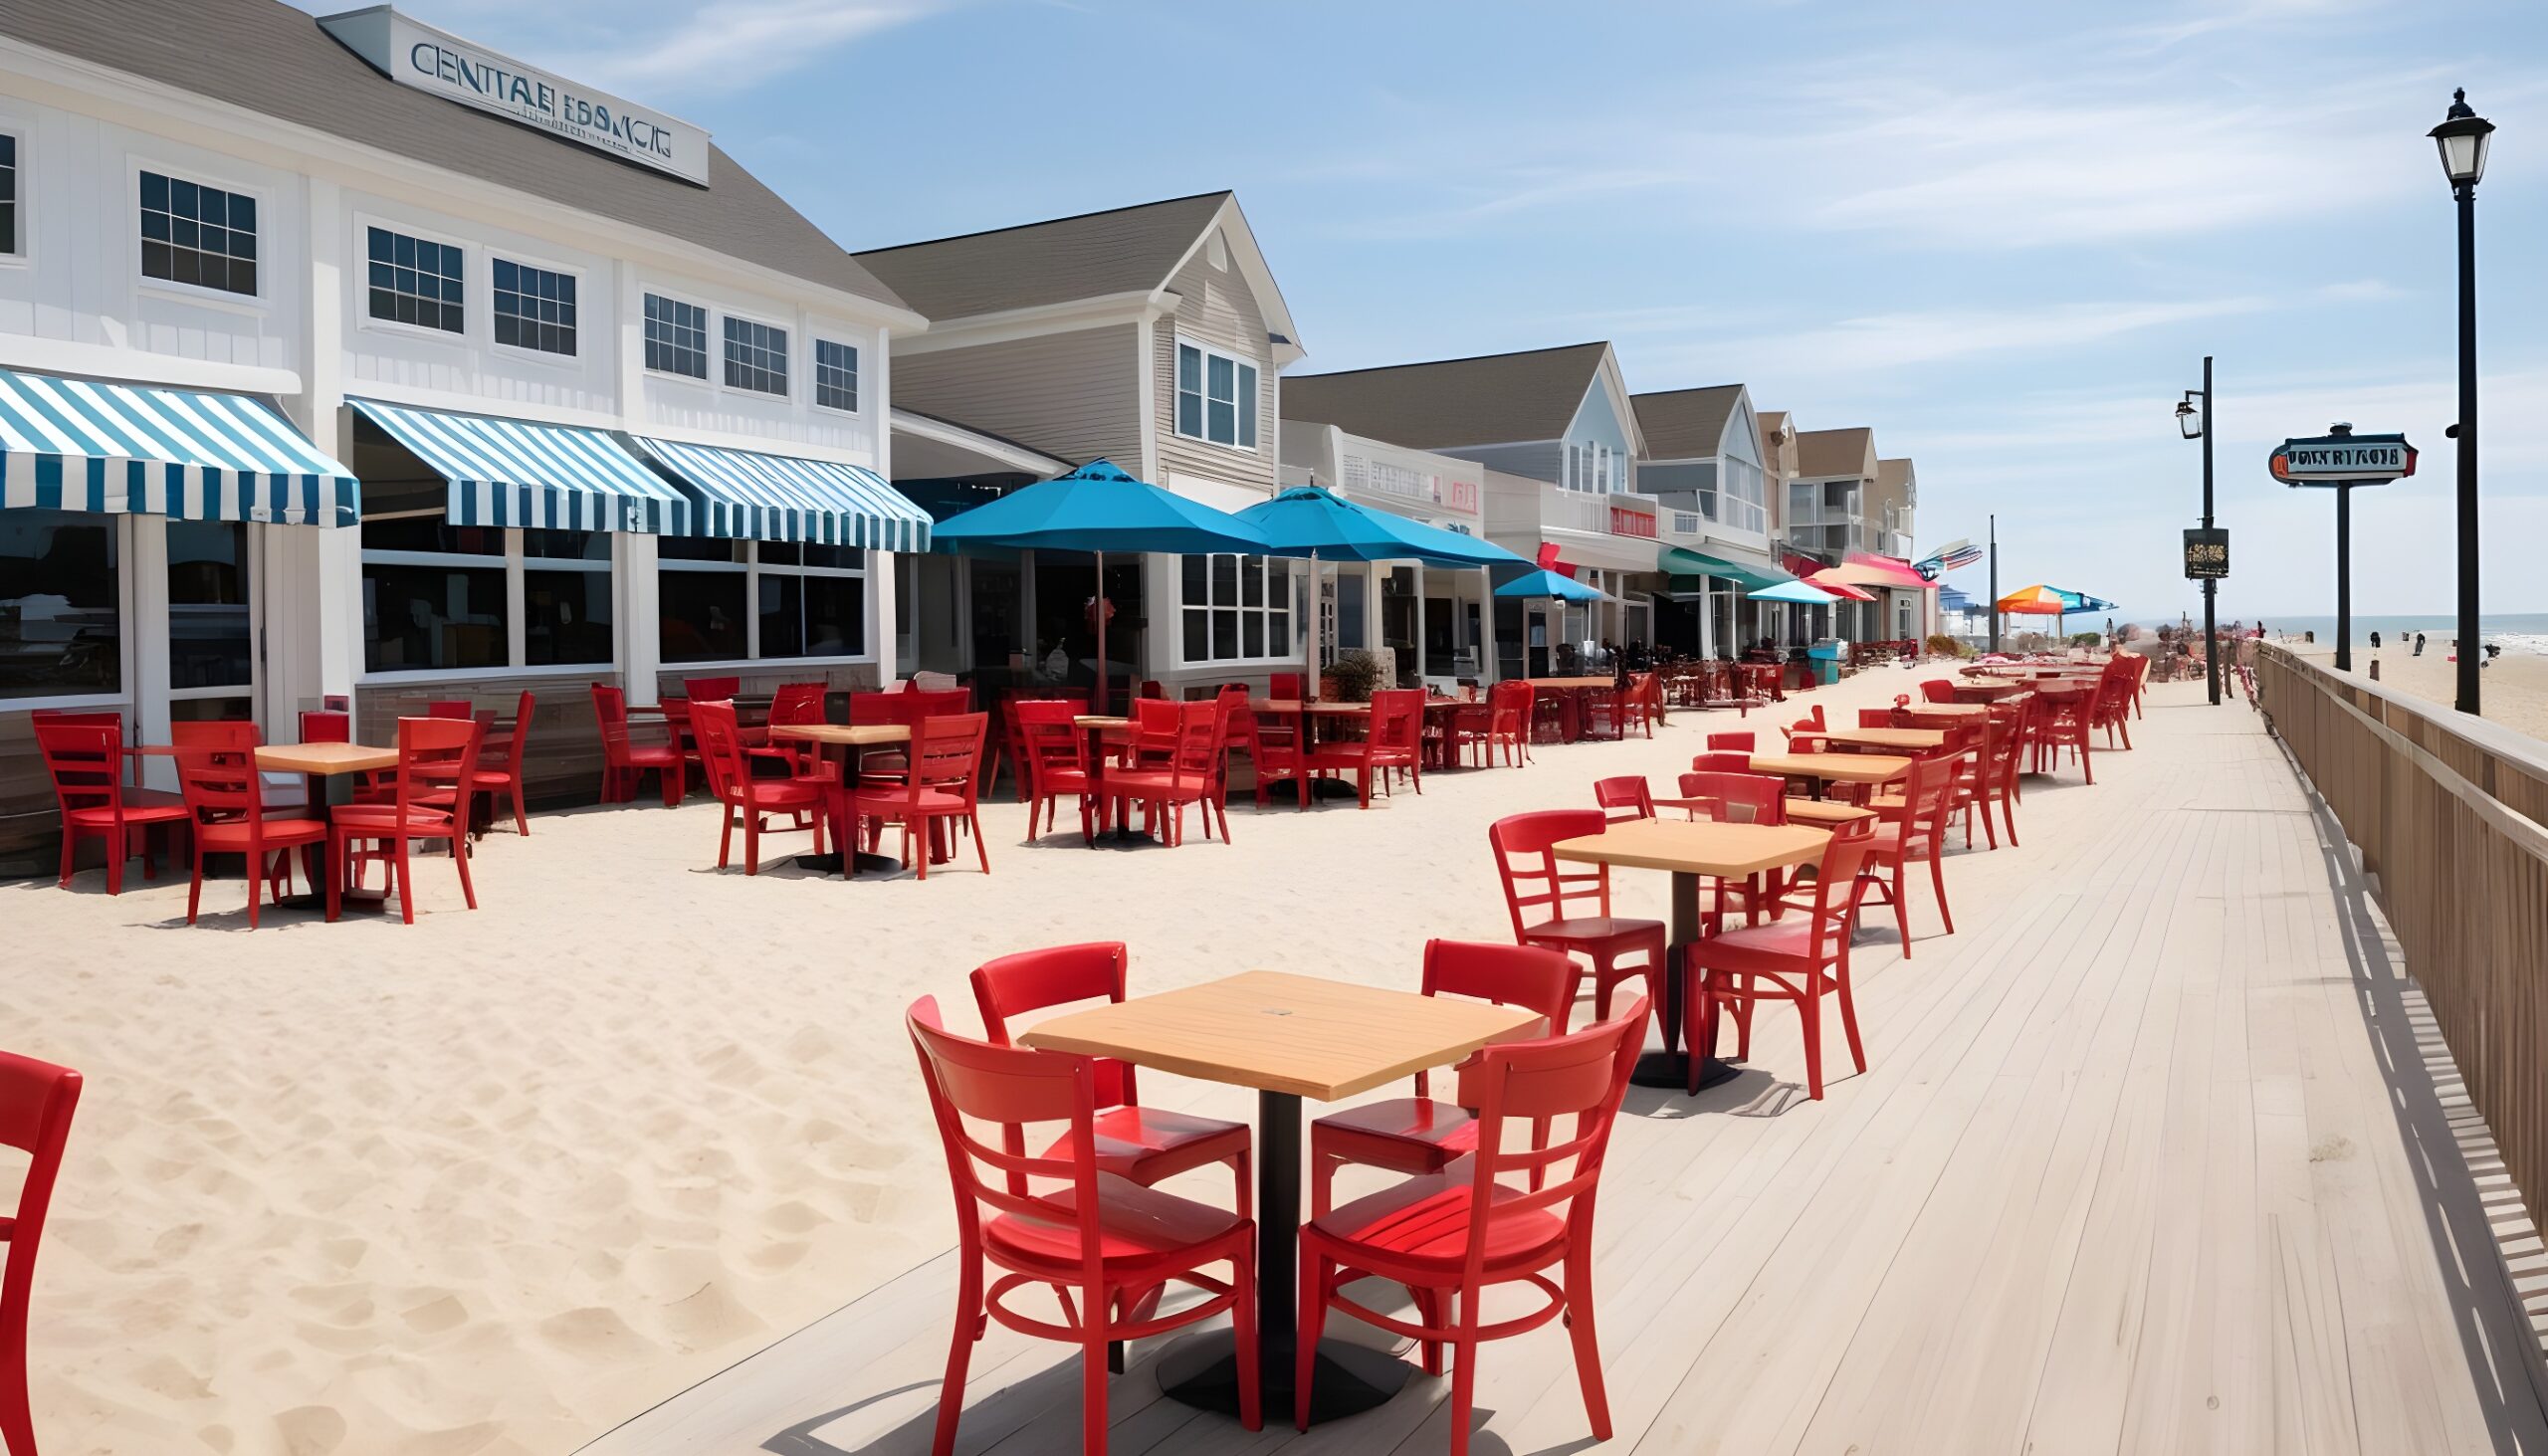 List of Good Places To Eat Near Rehoboth Beach?